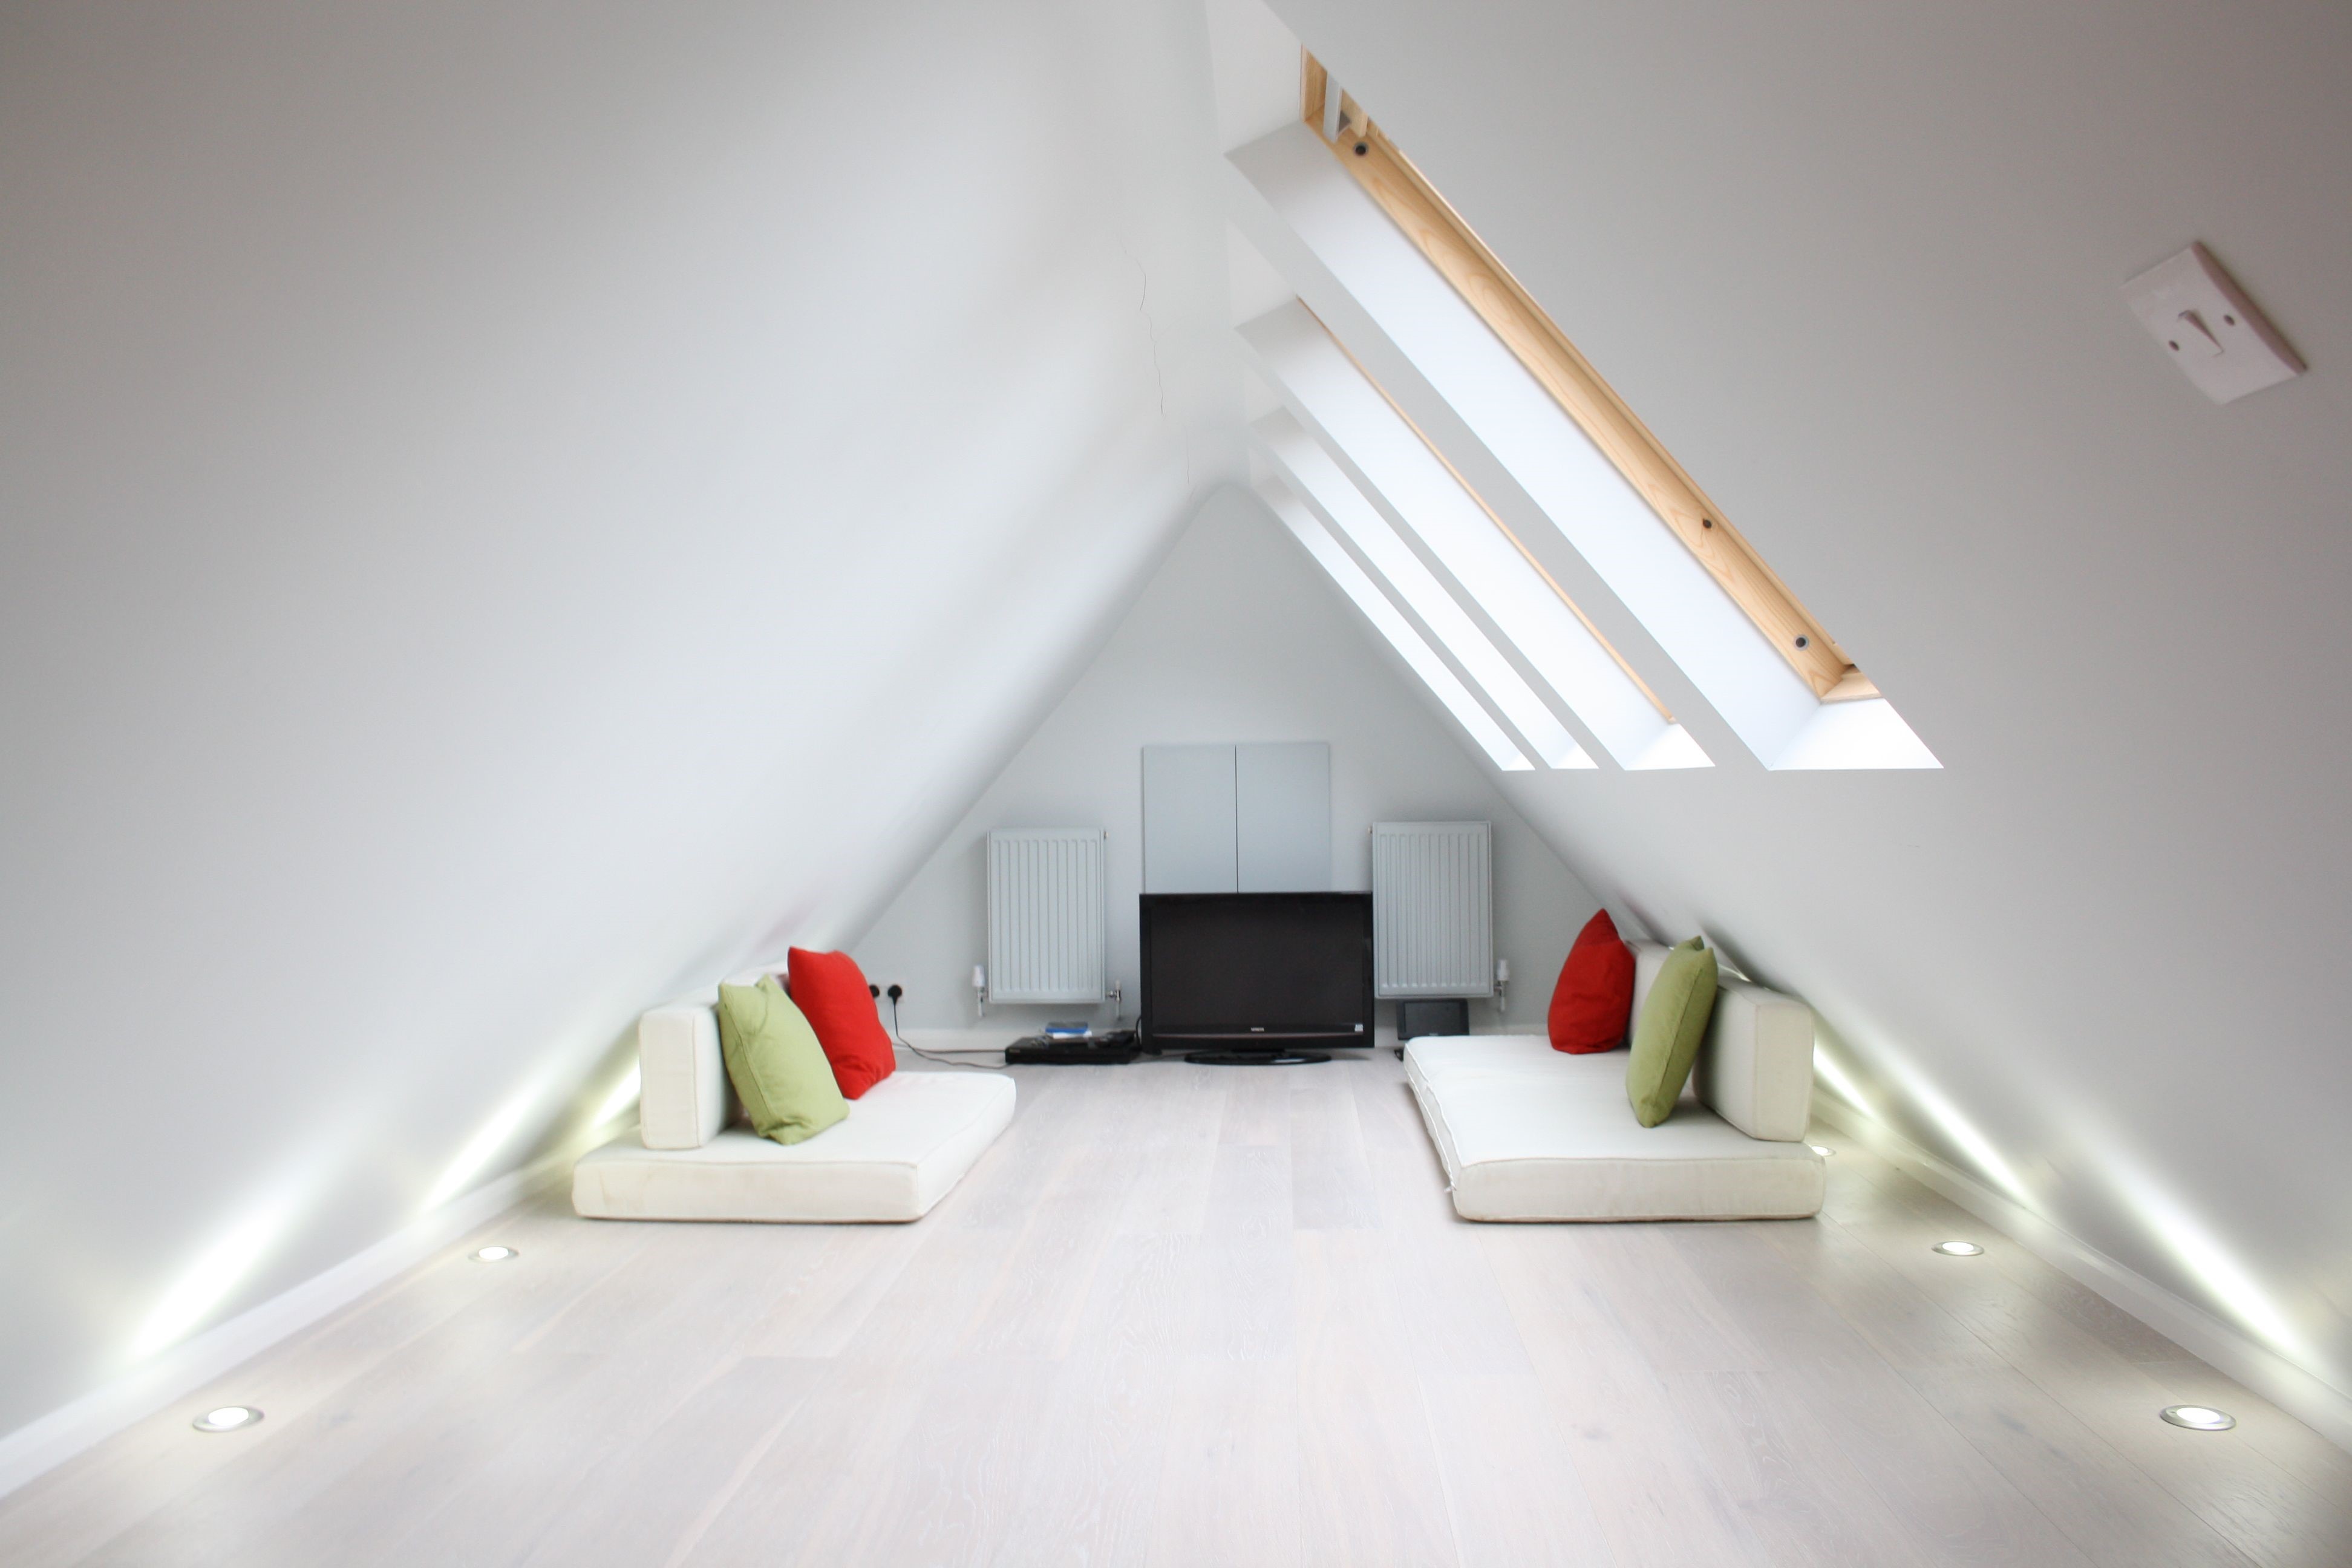 A minimalist loft conversion with floor cushions and a flat screen television